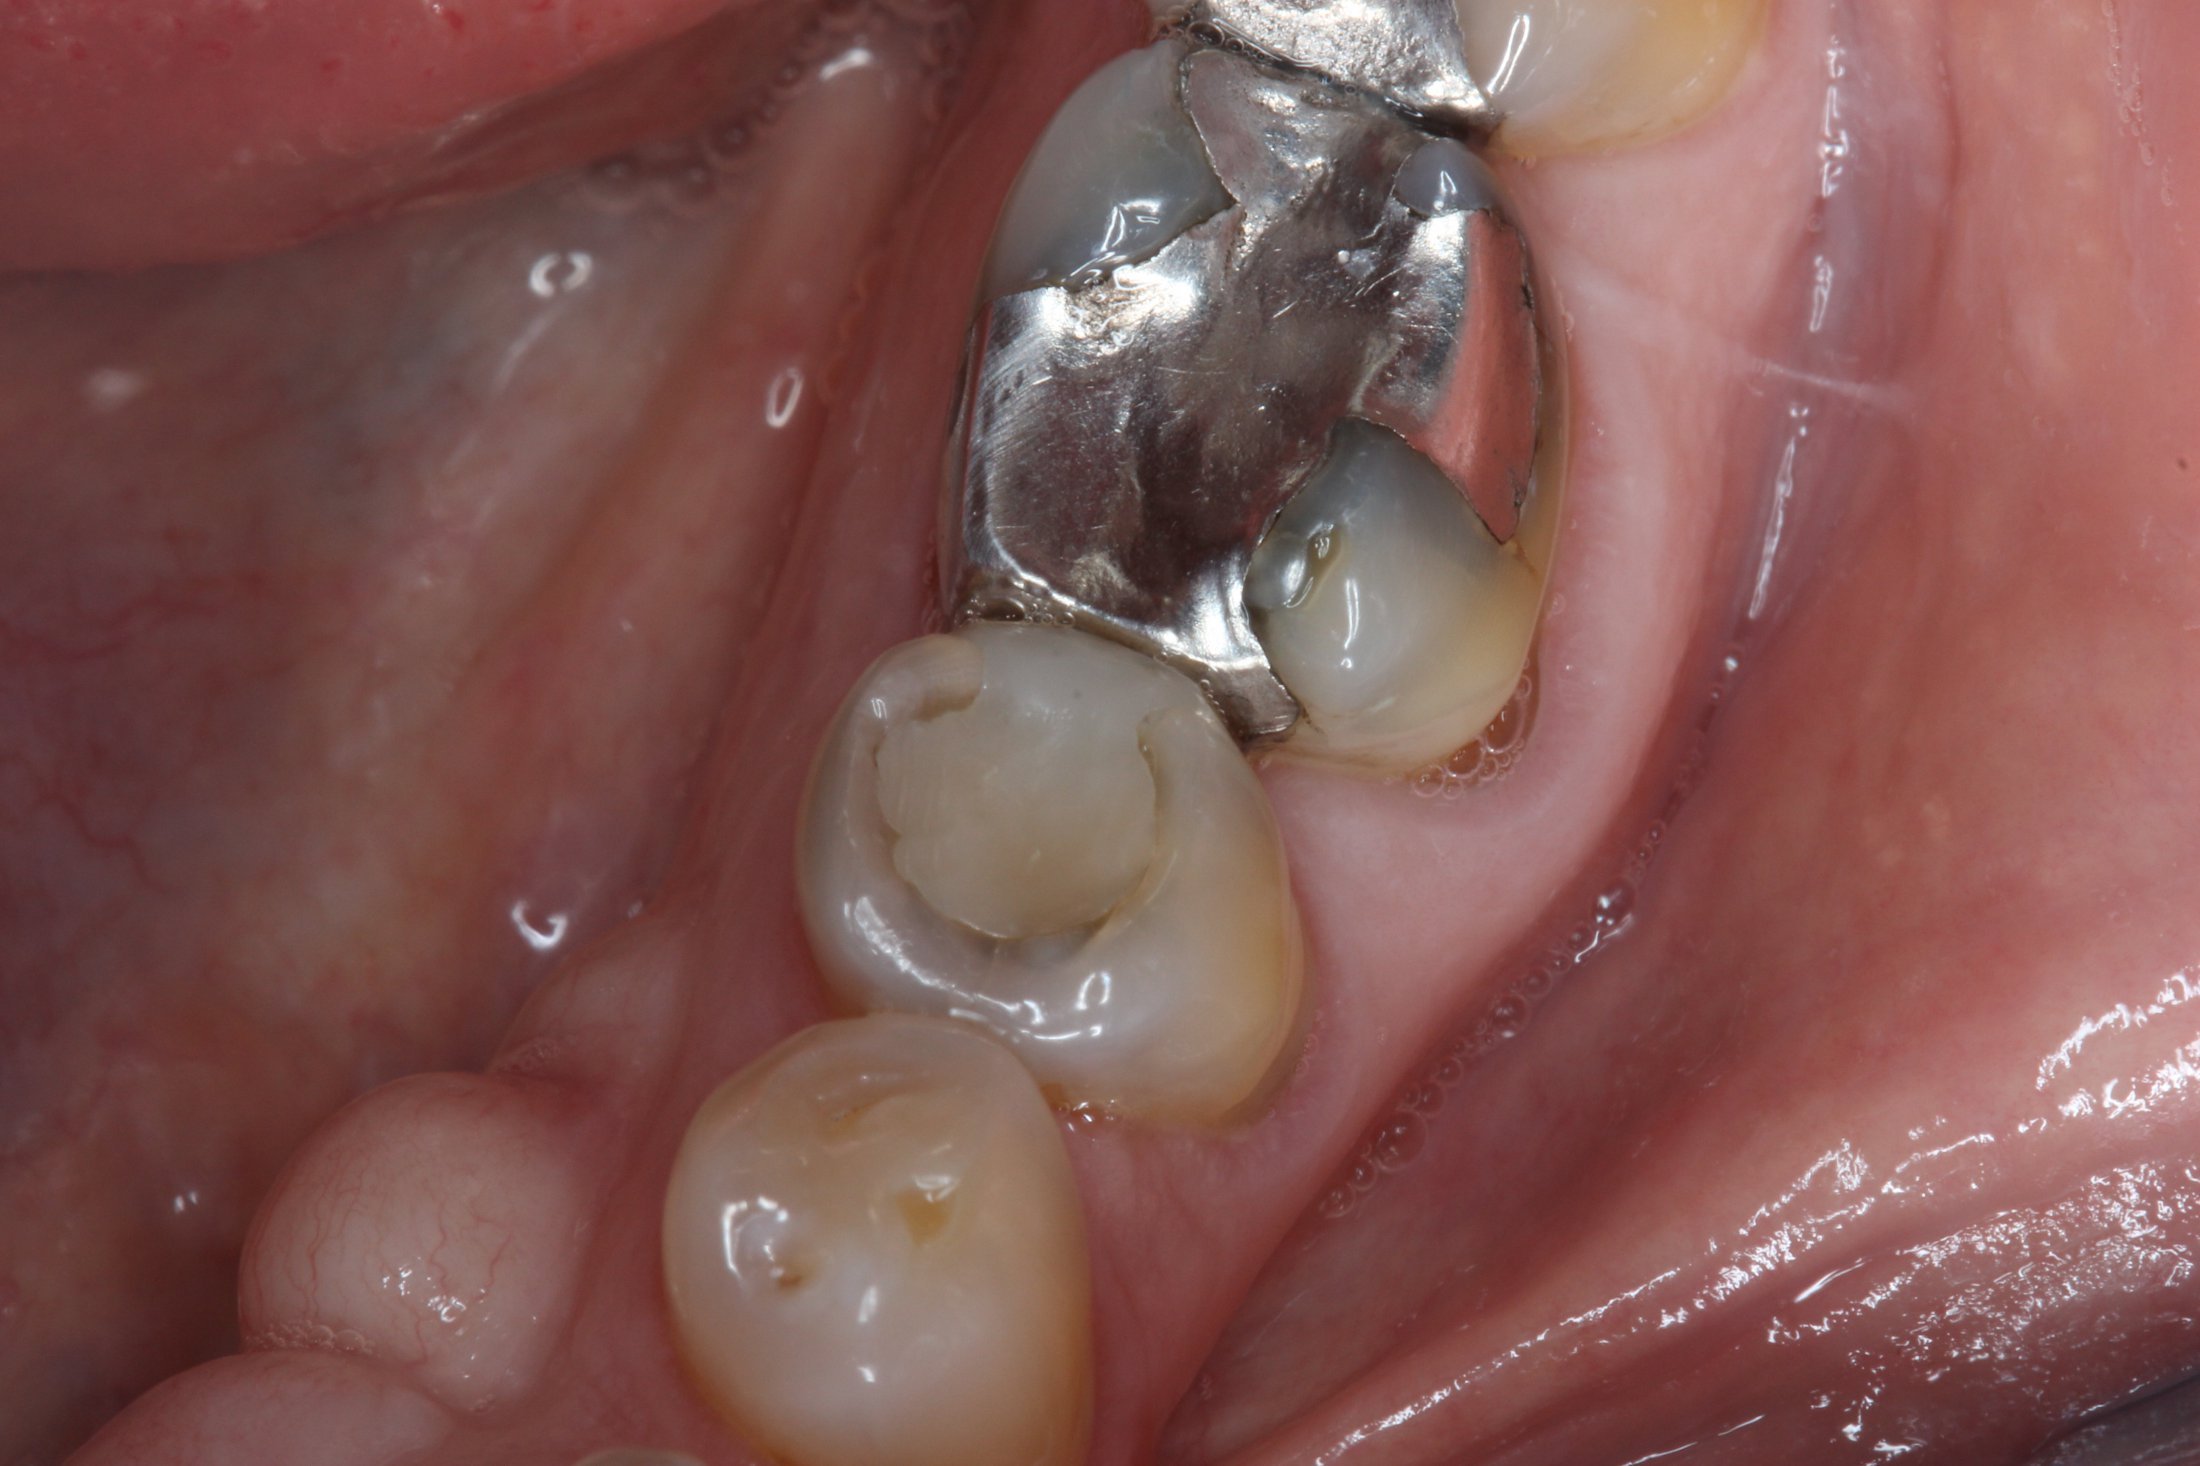 Patient's mouth before dental treatment